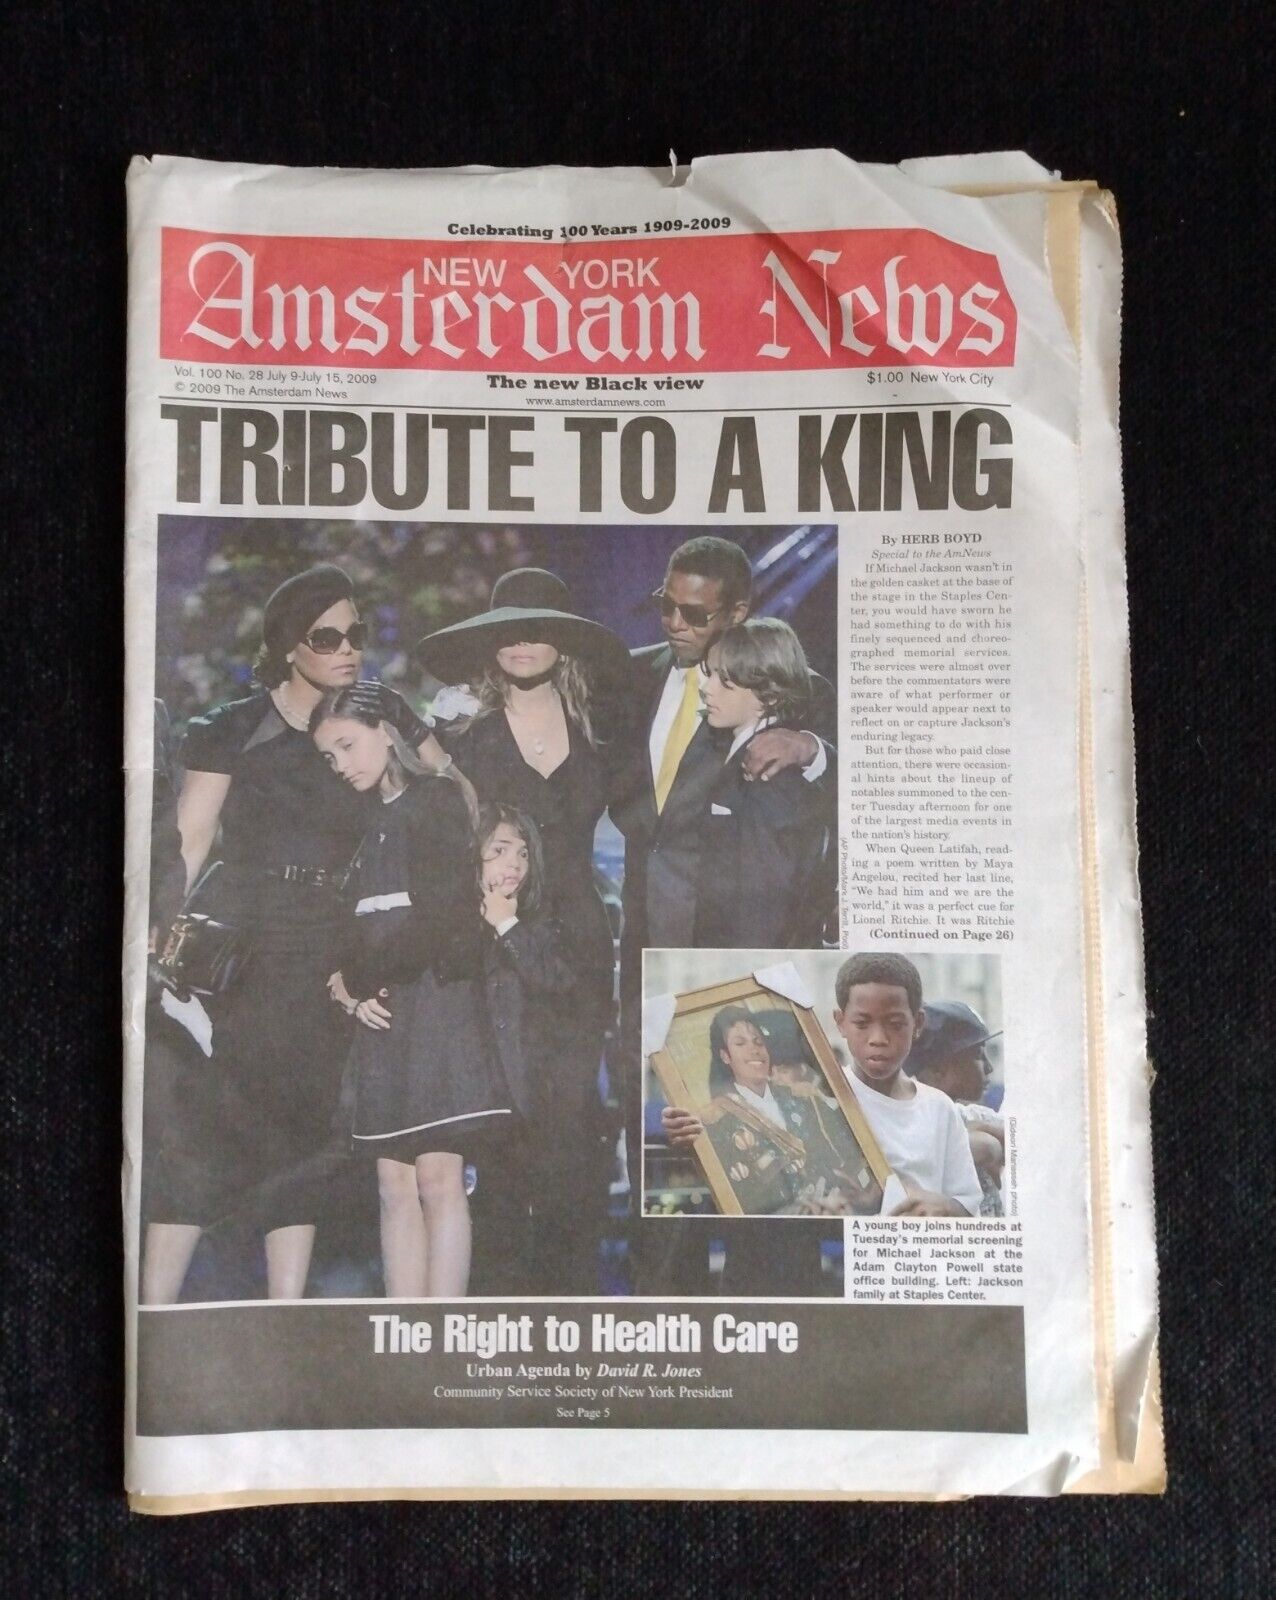 Rare MICHAEL JACKSON Death Tribute To A King July 2009 New York Amsterdam News 